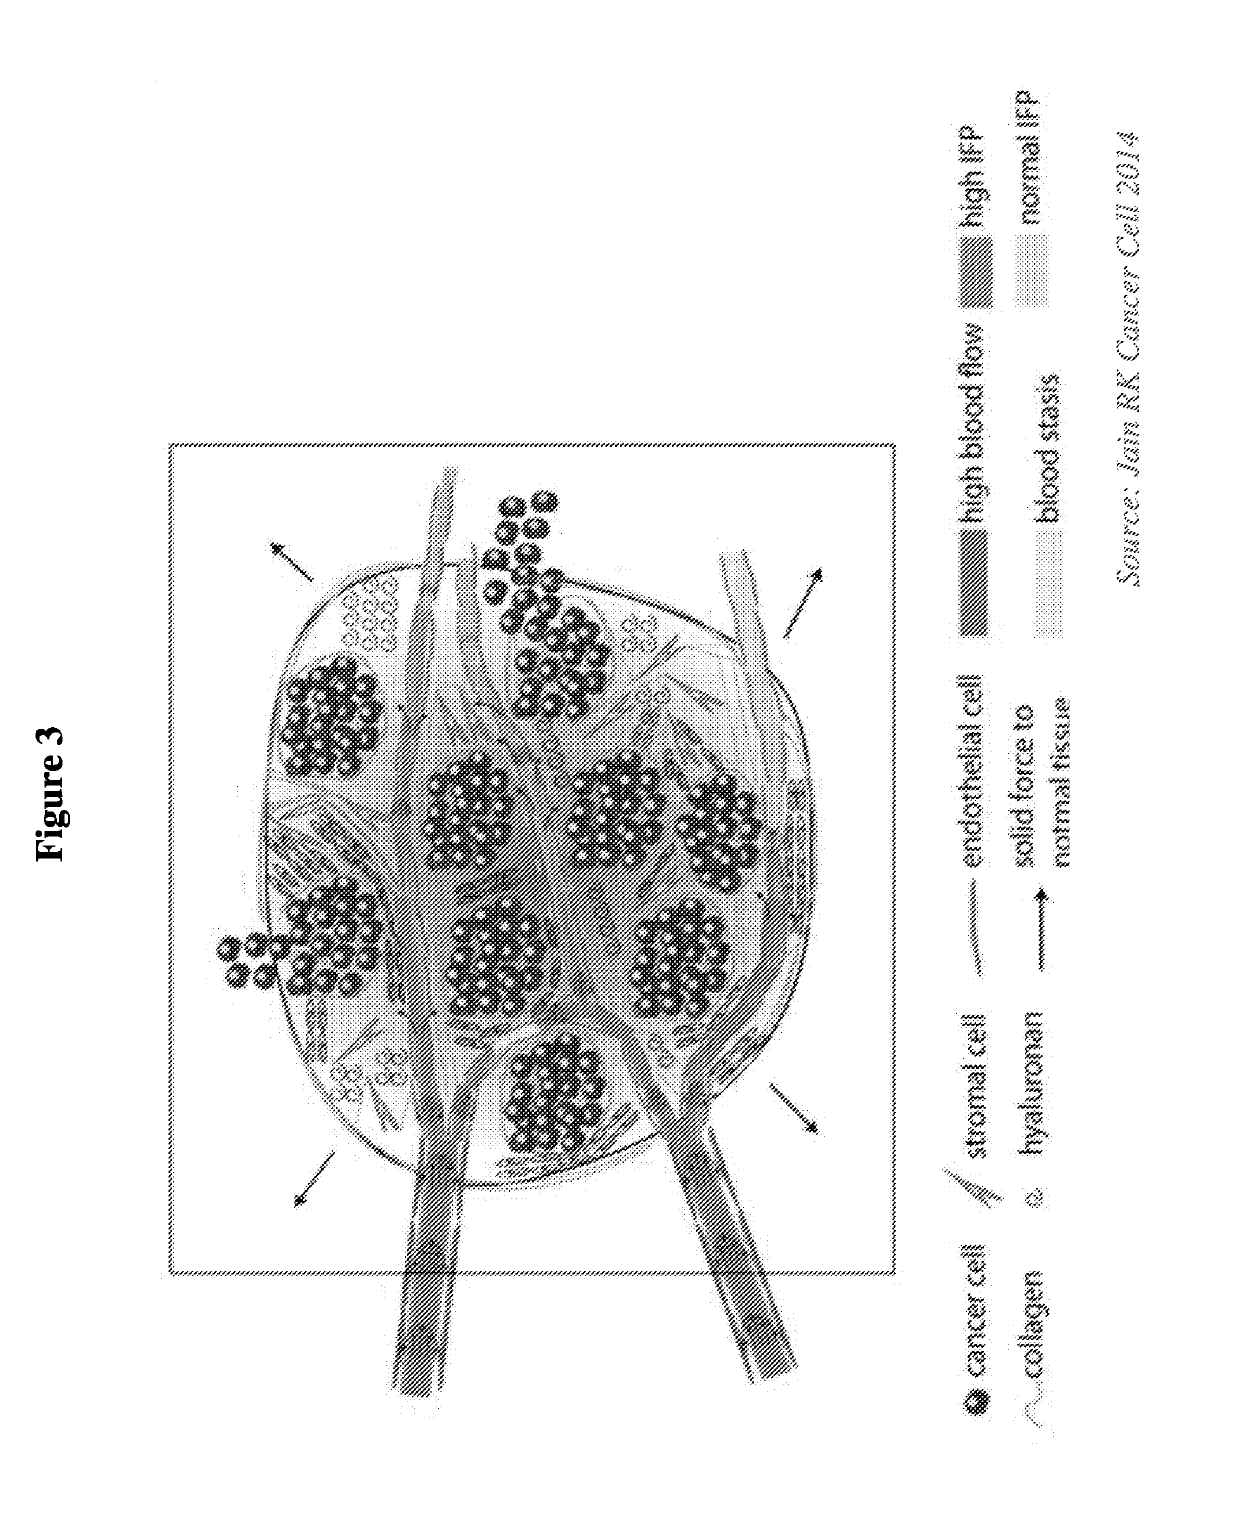 Devices, systems and methods for inhibiting invasion and metasases of cancer